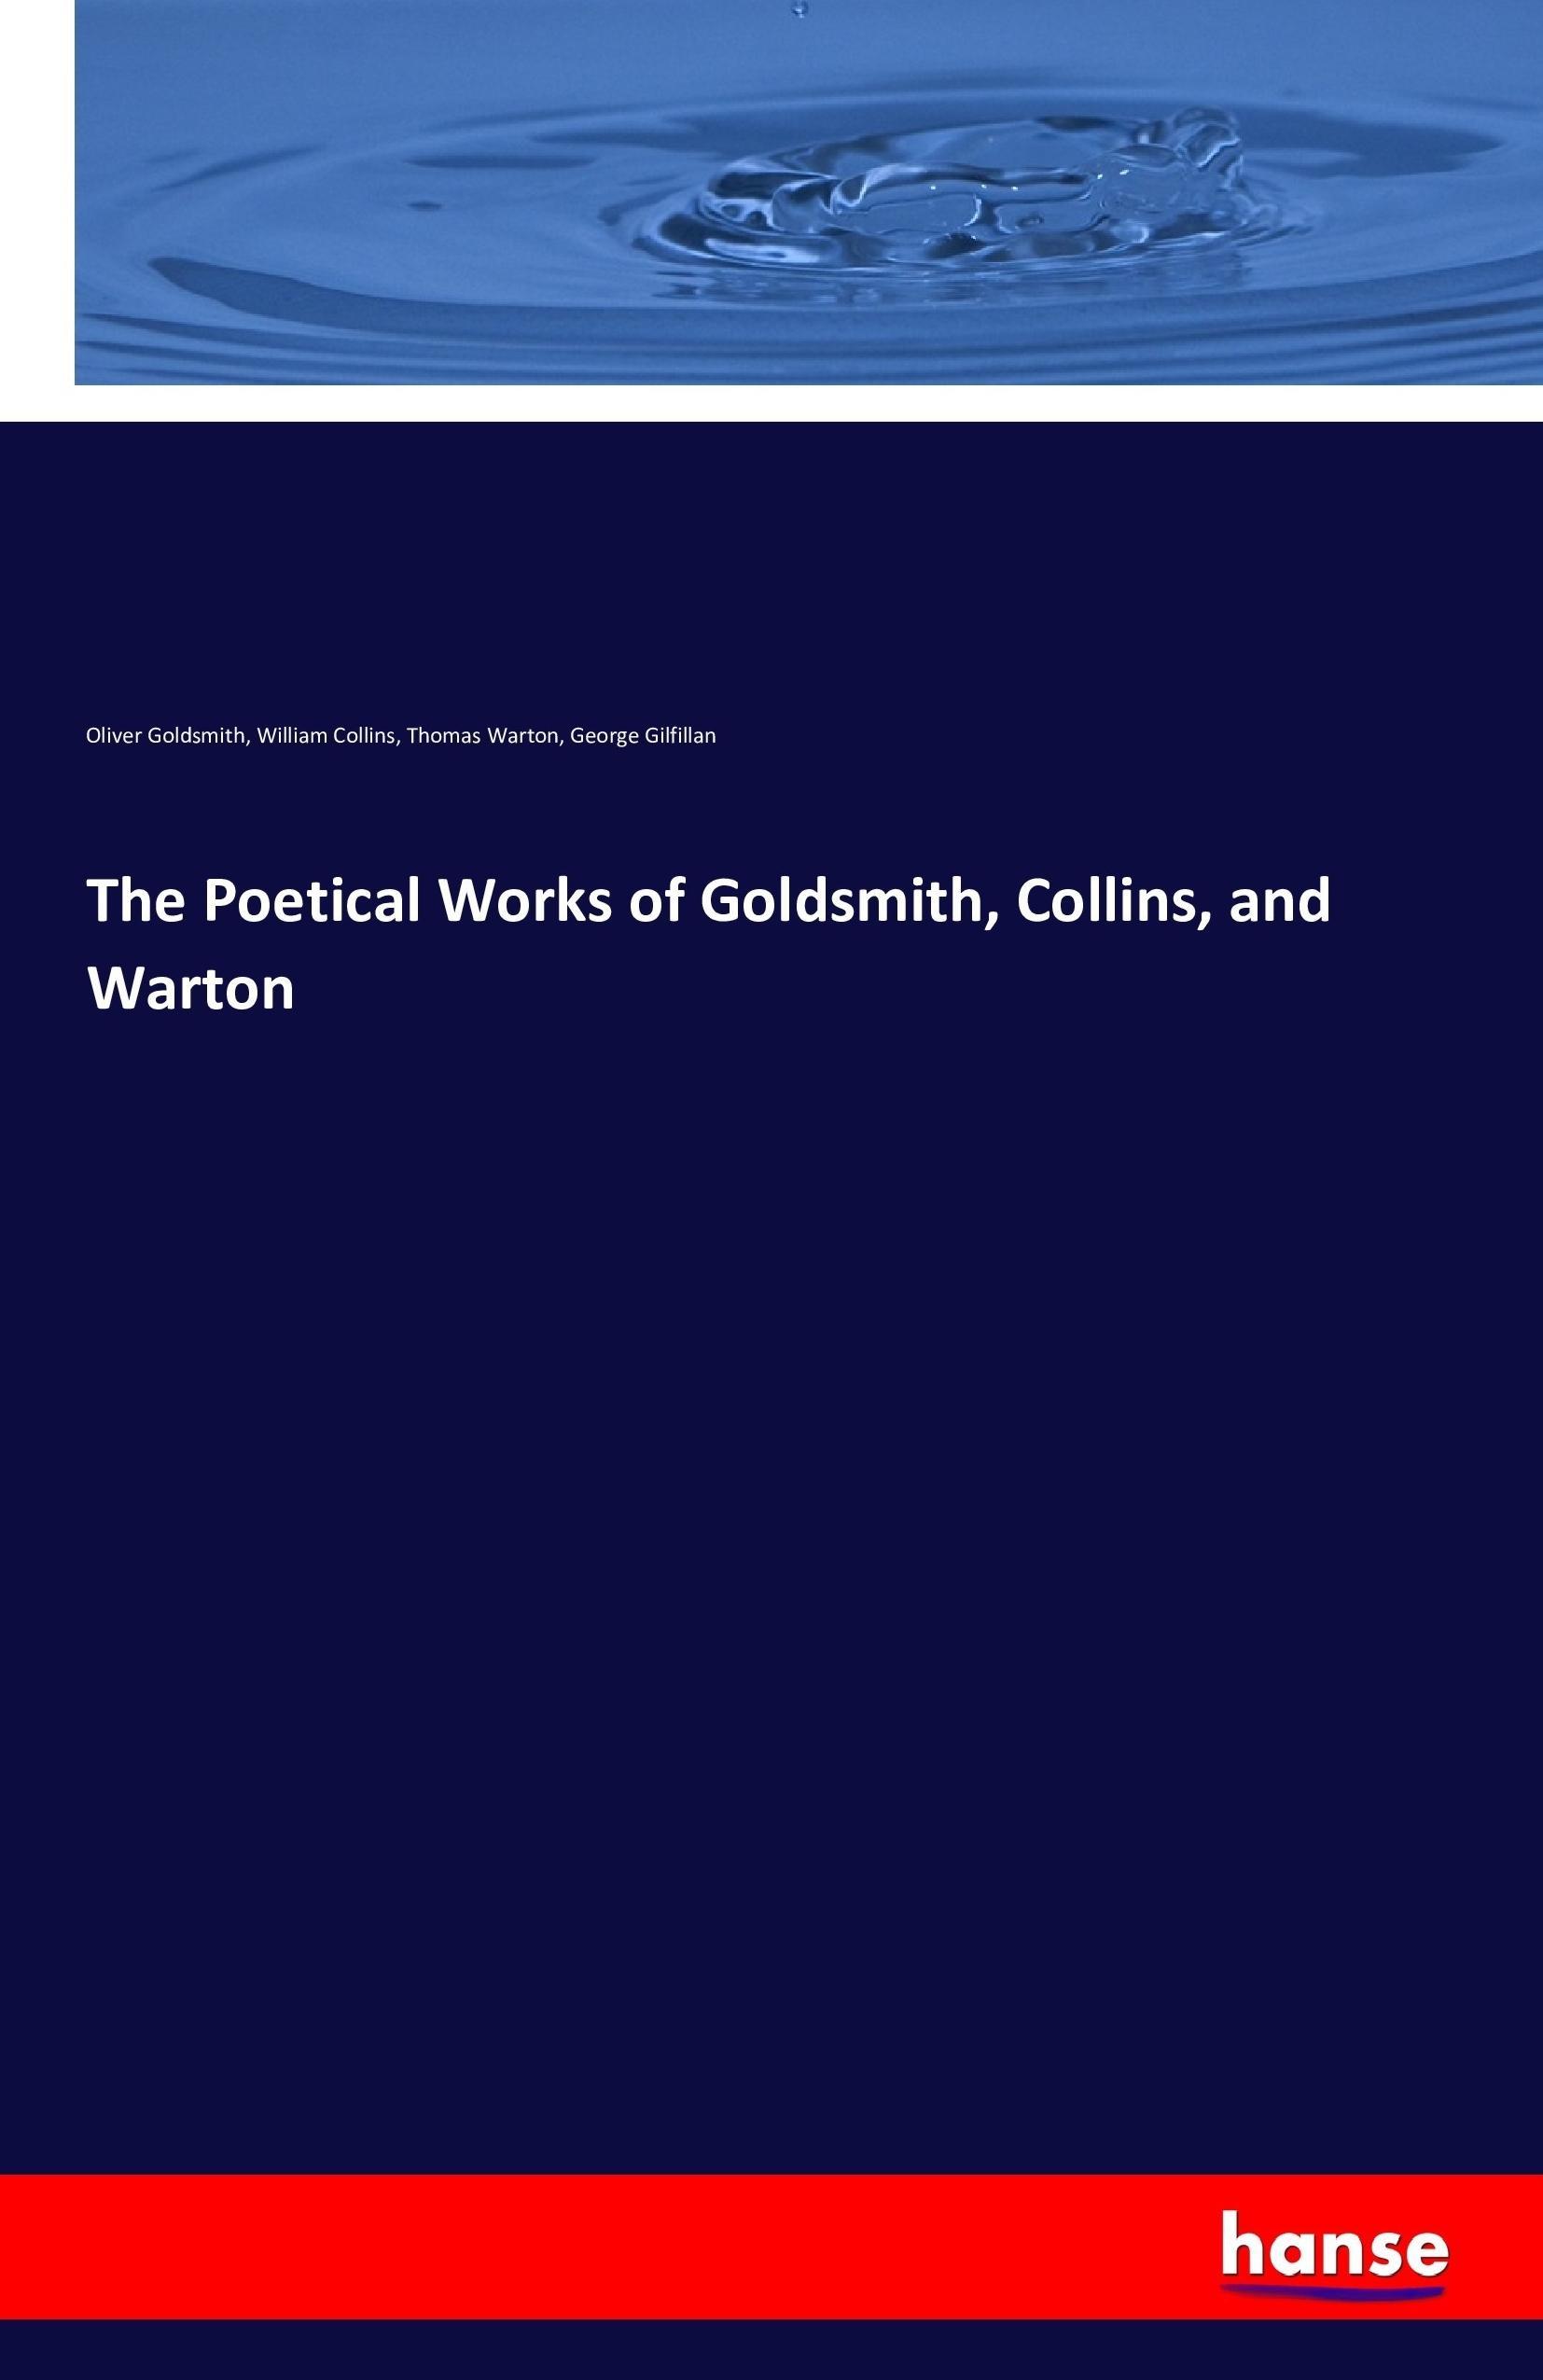 The Poetical Works of Goldsmith, Collins, and Warton - Goldsmith, Oliver Collins, William Warton, Thomas Gilfillan, George